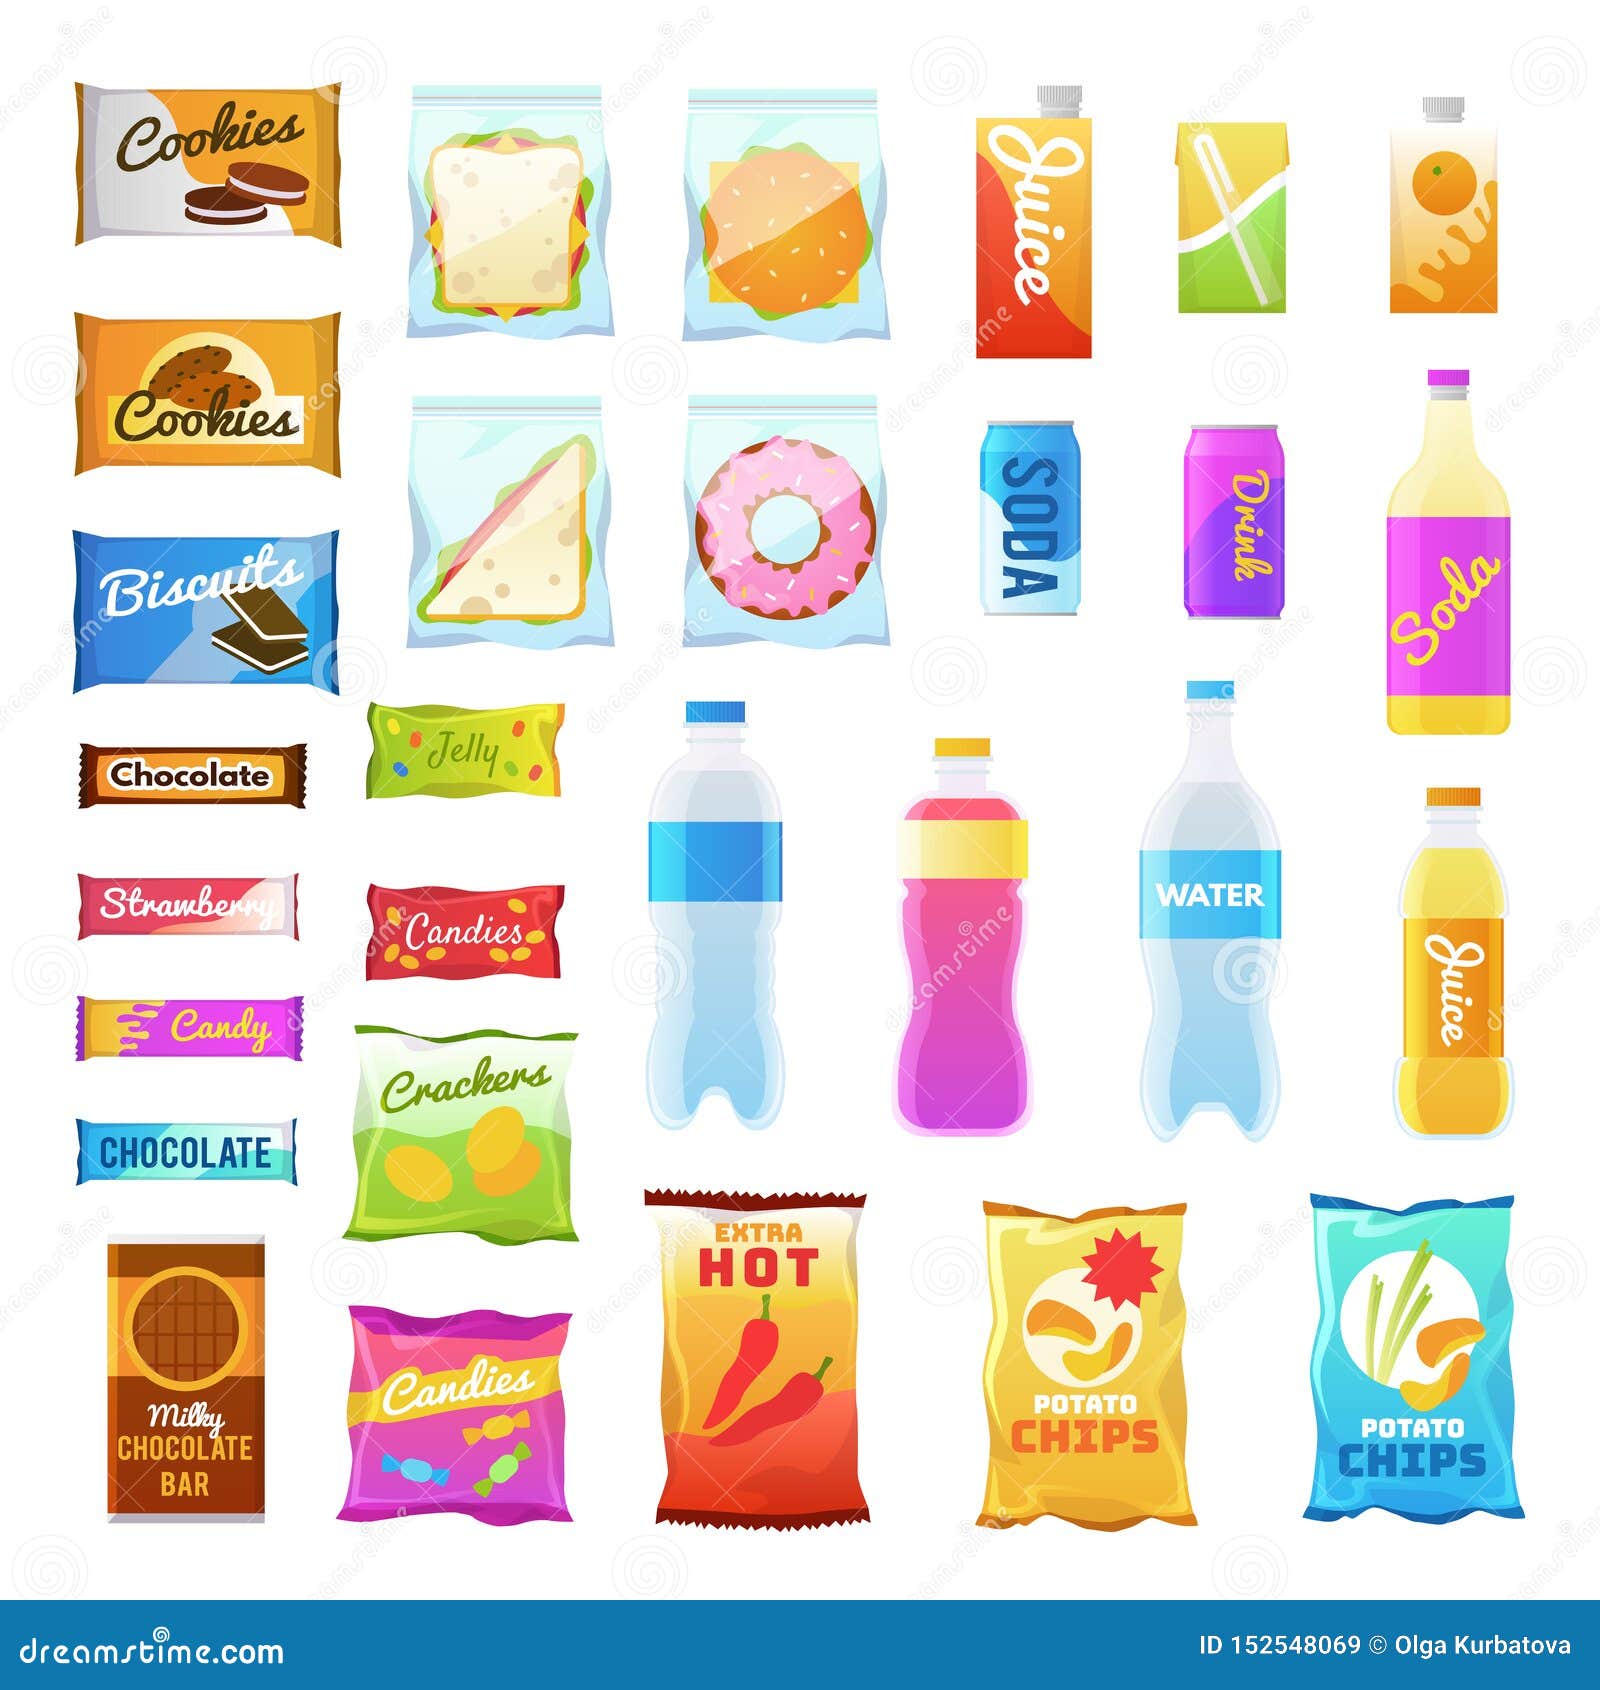 vending products. beverages and snack plastic package, fast food snack packs, biscuit sandwich. drinks water juice flat